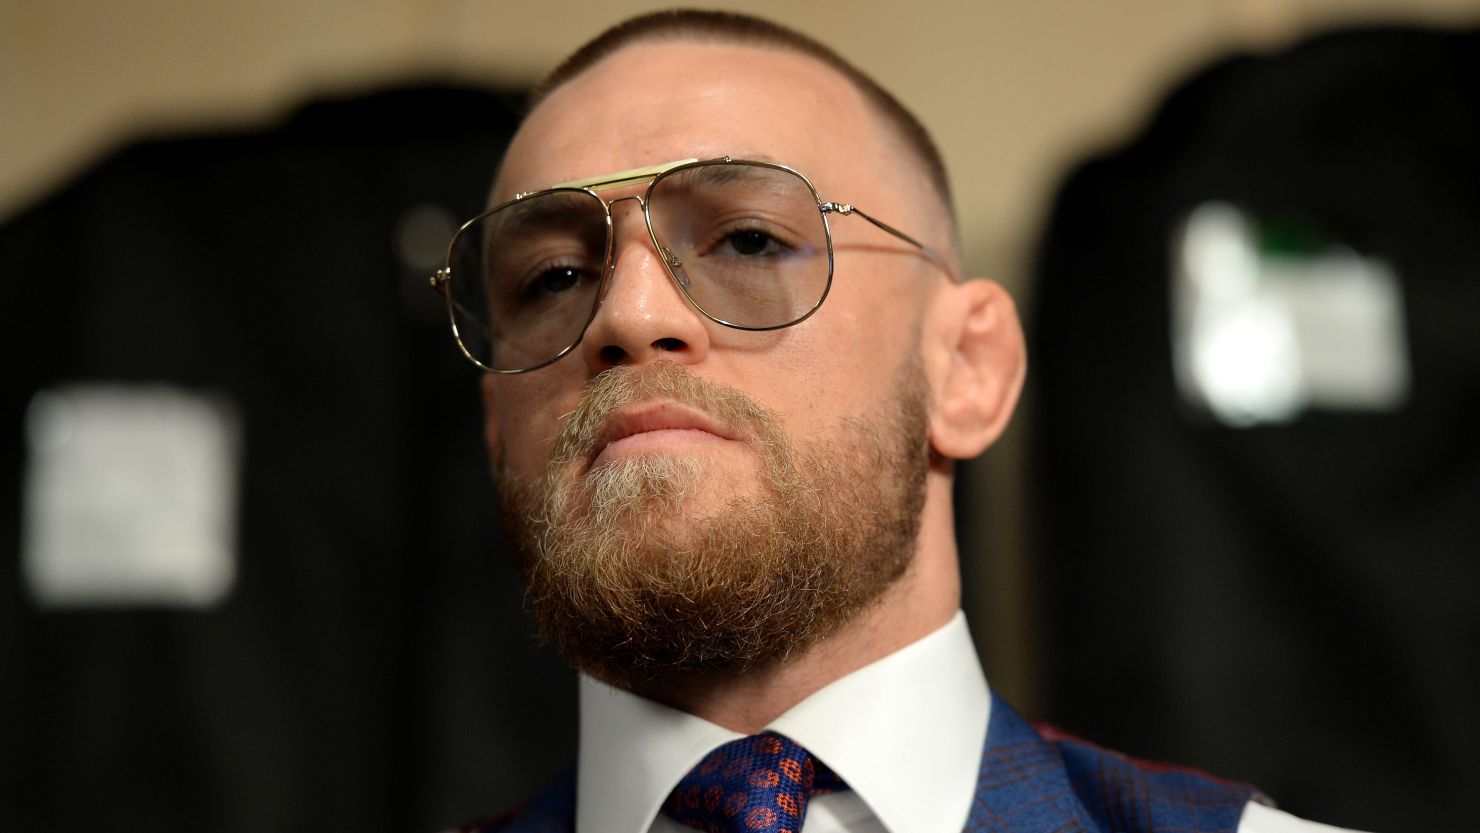 Conor McGregor prior to his boxing match against Floyd Mayweather Jr. in August 2017.